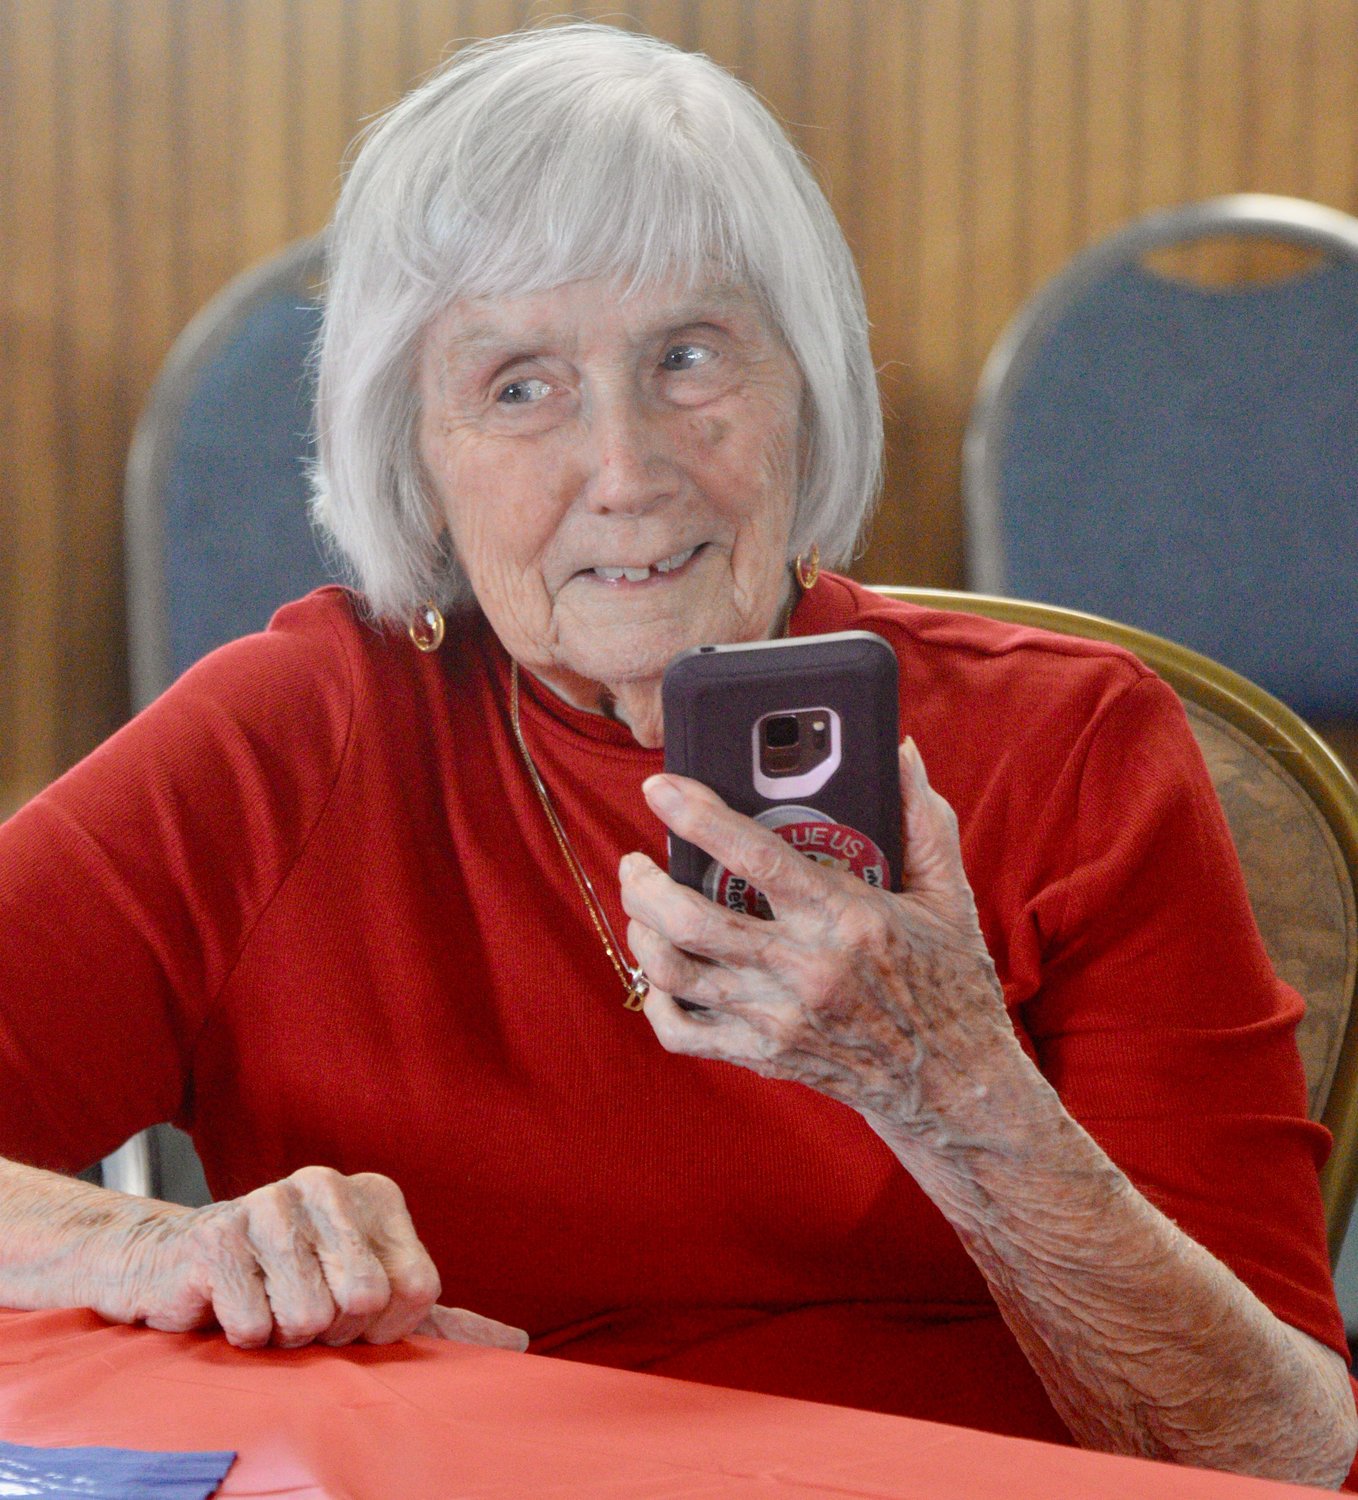 Mary Martin FaceTimes from the party with one of her grandchildren, Patrick, who was in Japan. It was about 4 a.m. his time.